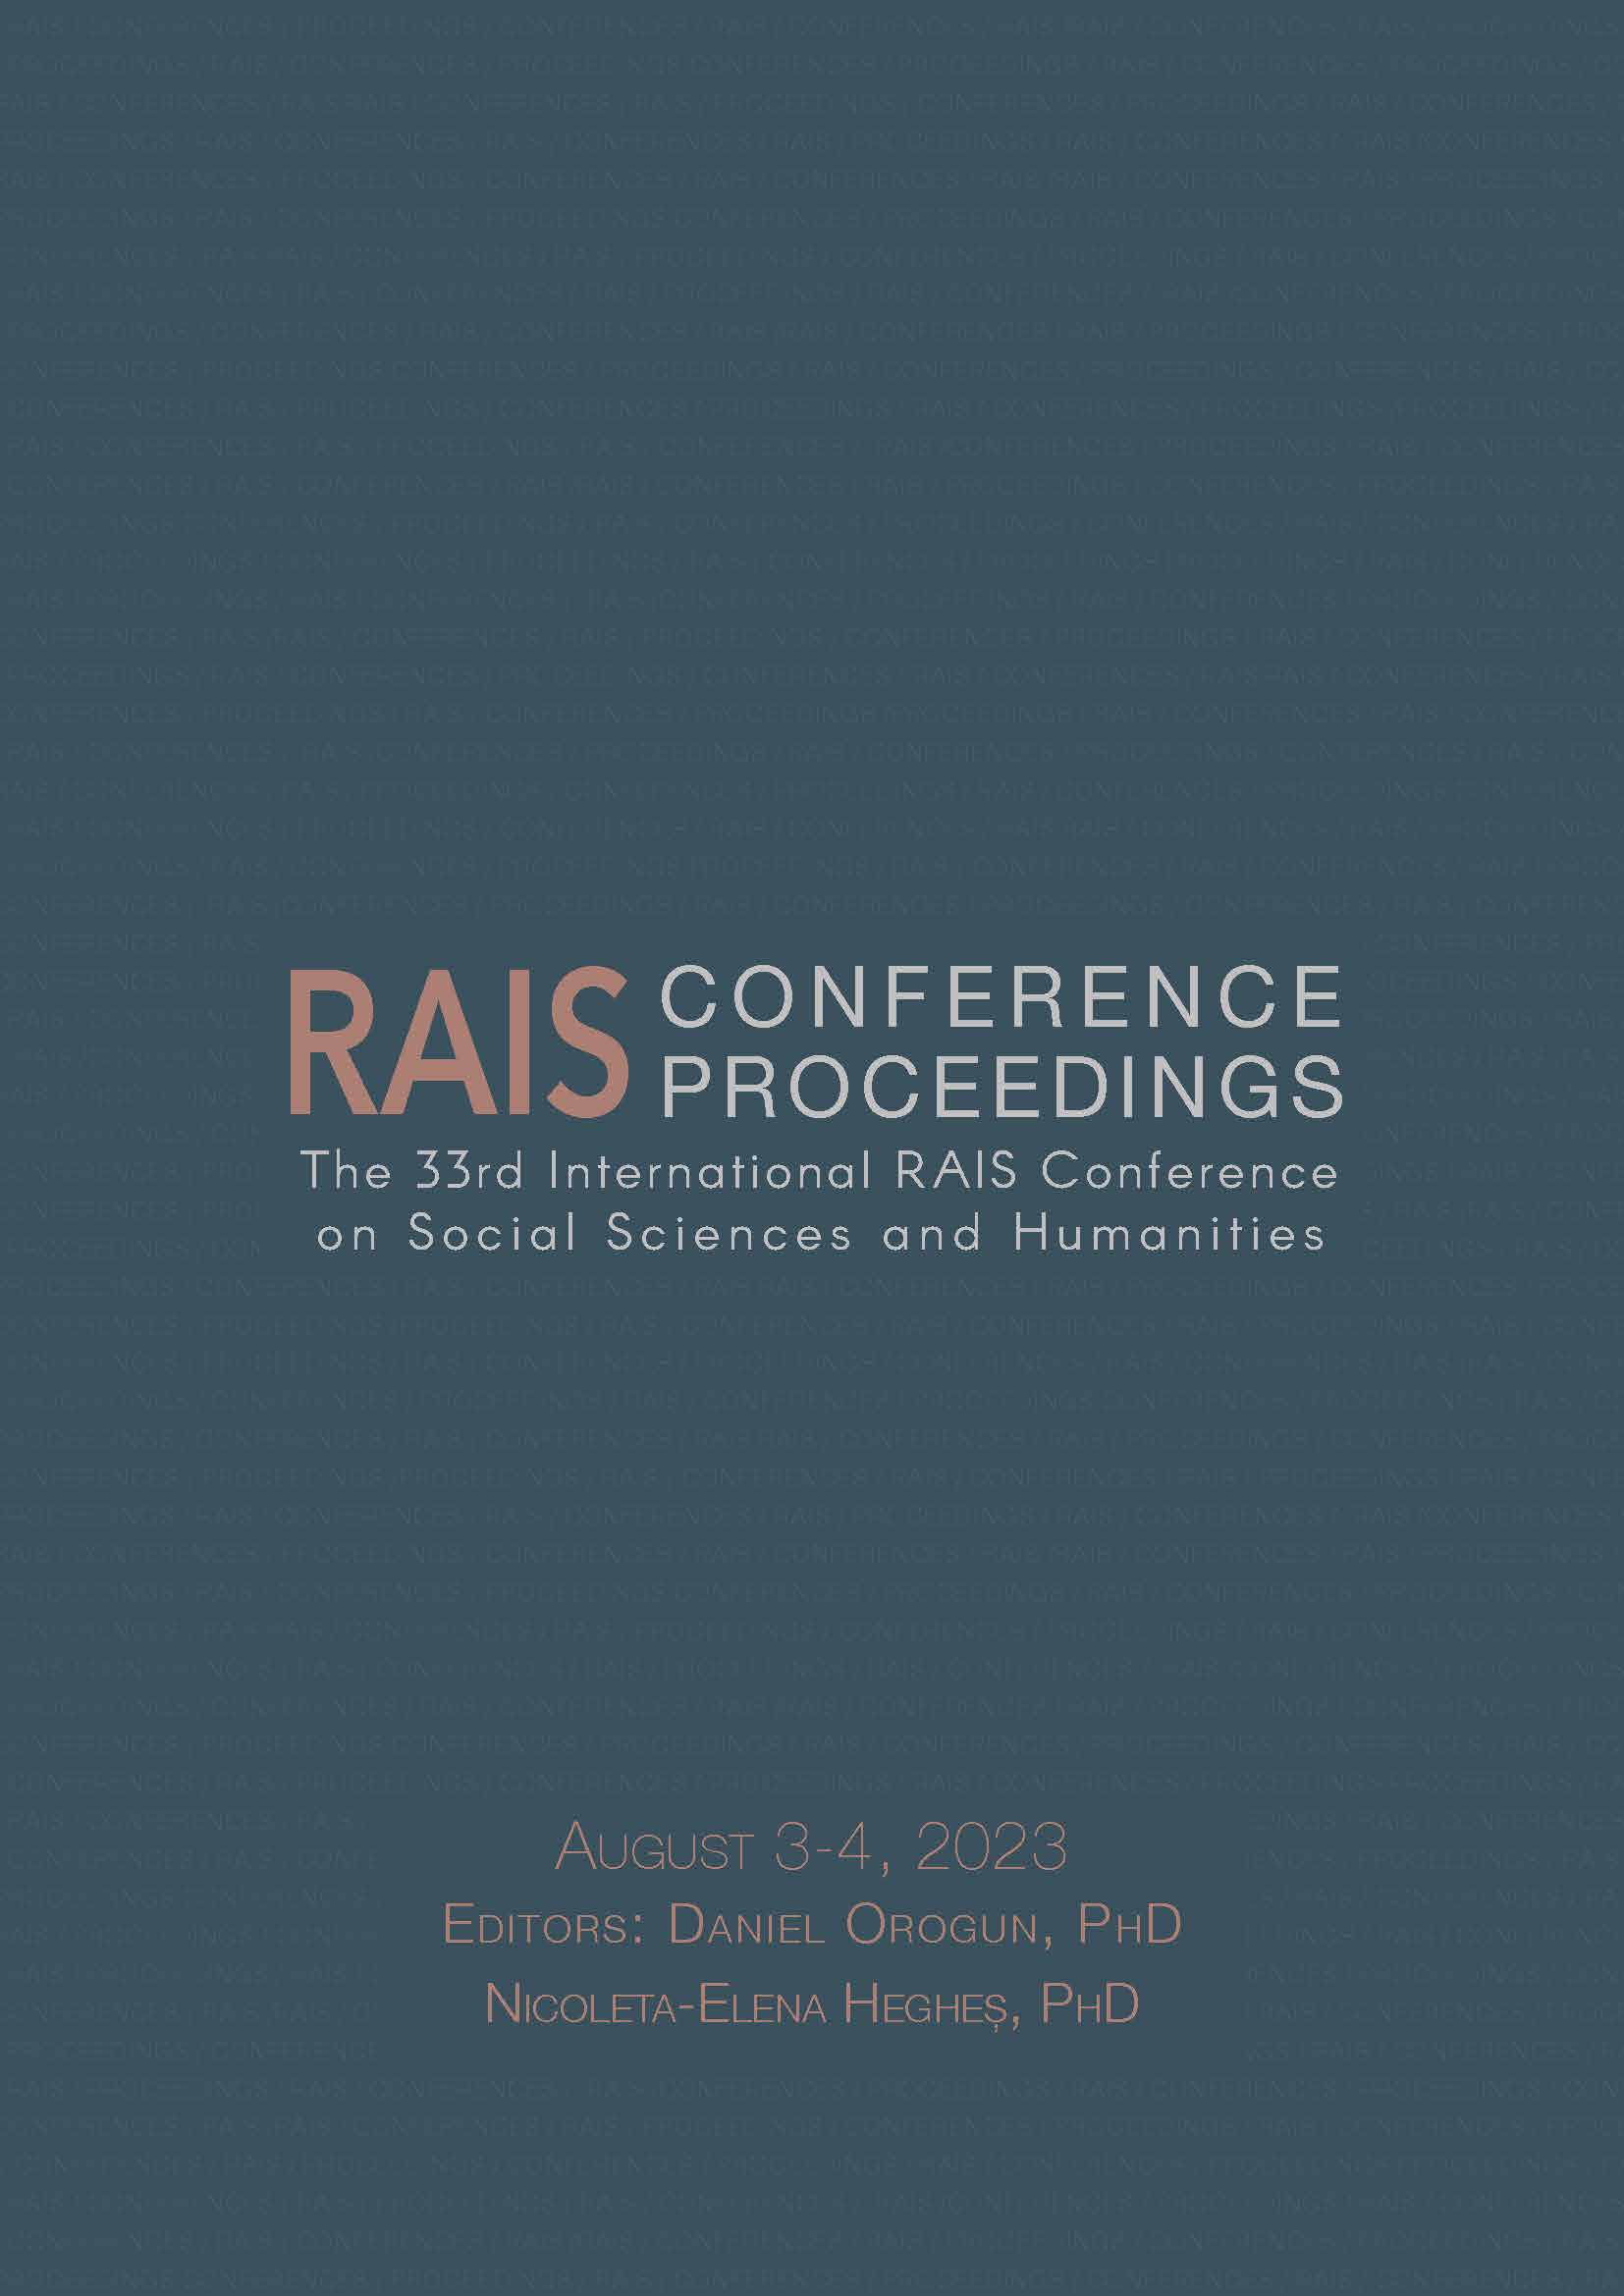 Proceedings of the 33rd International RAIS Conference on Social Sciences and Humanities